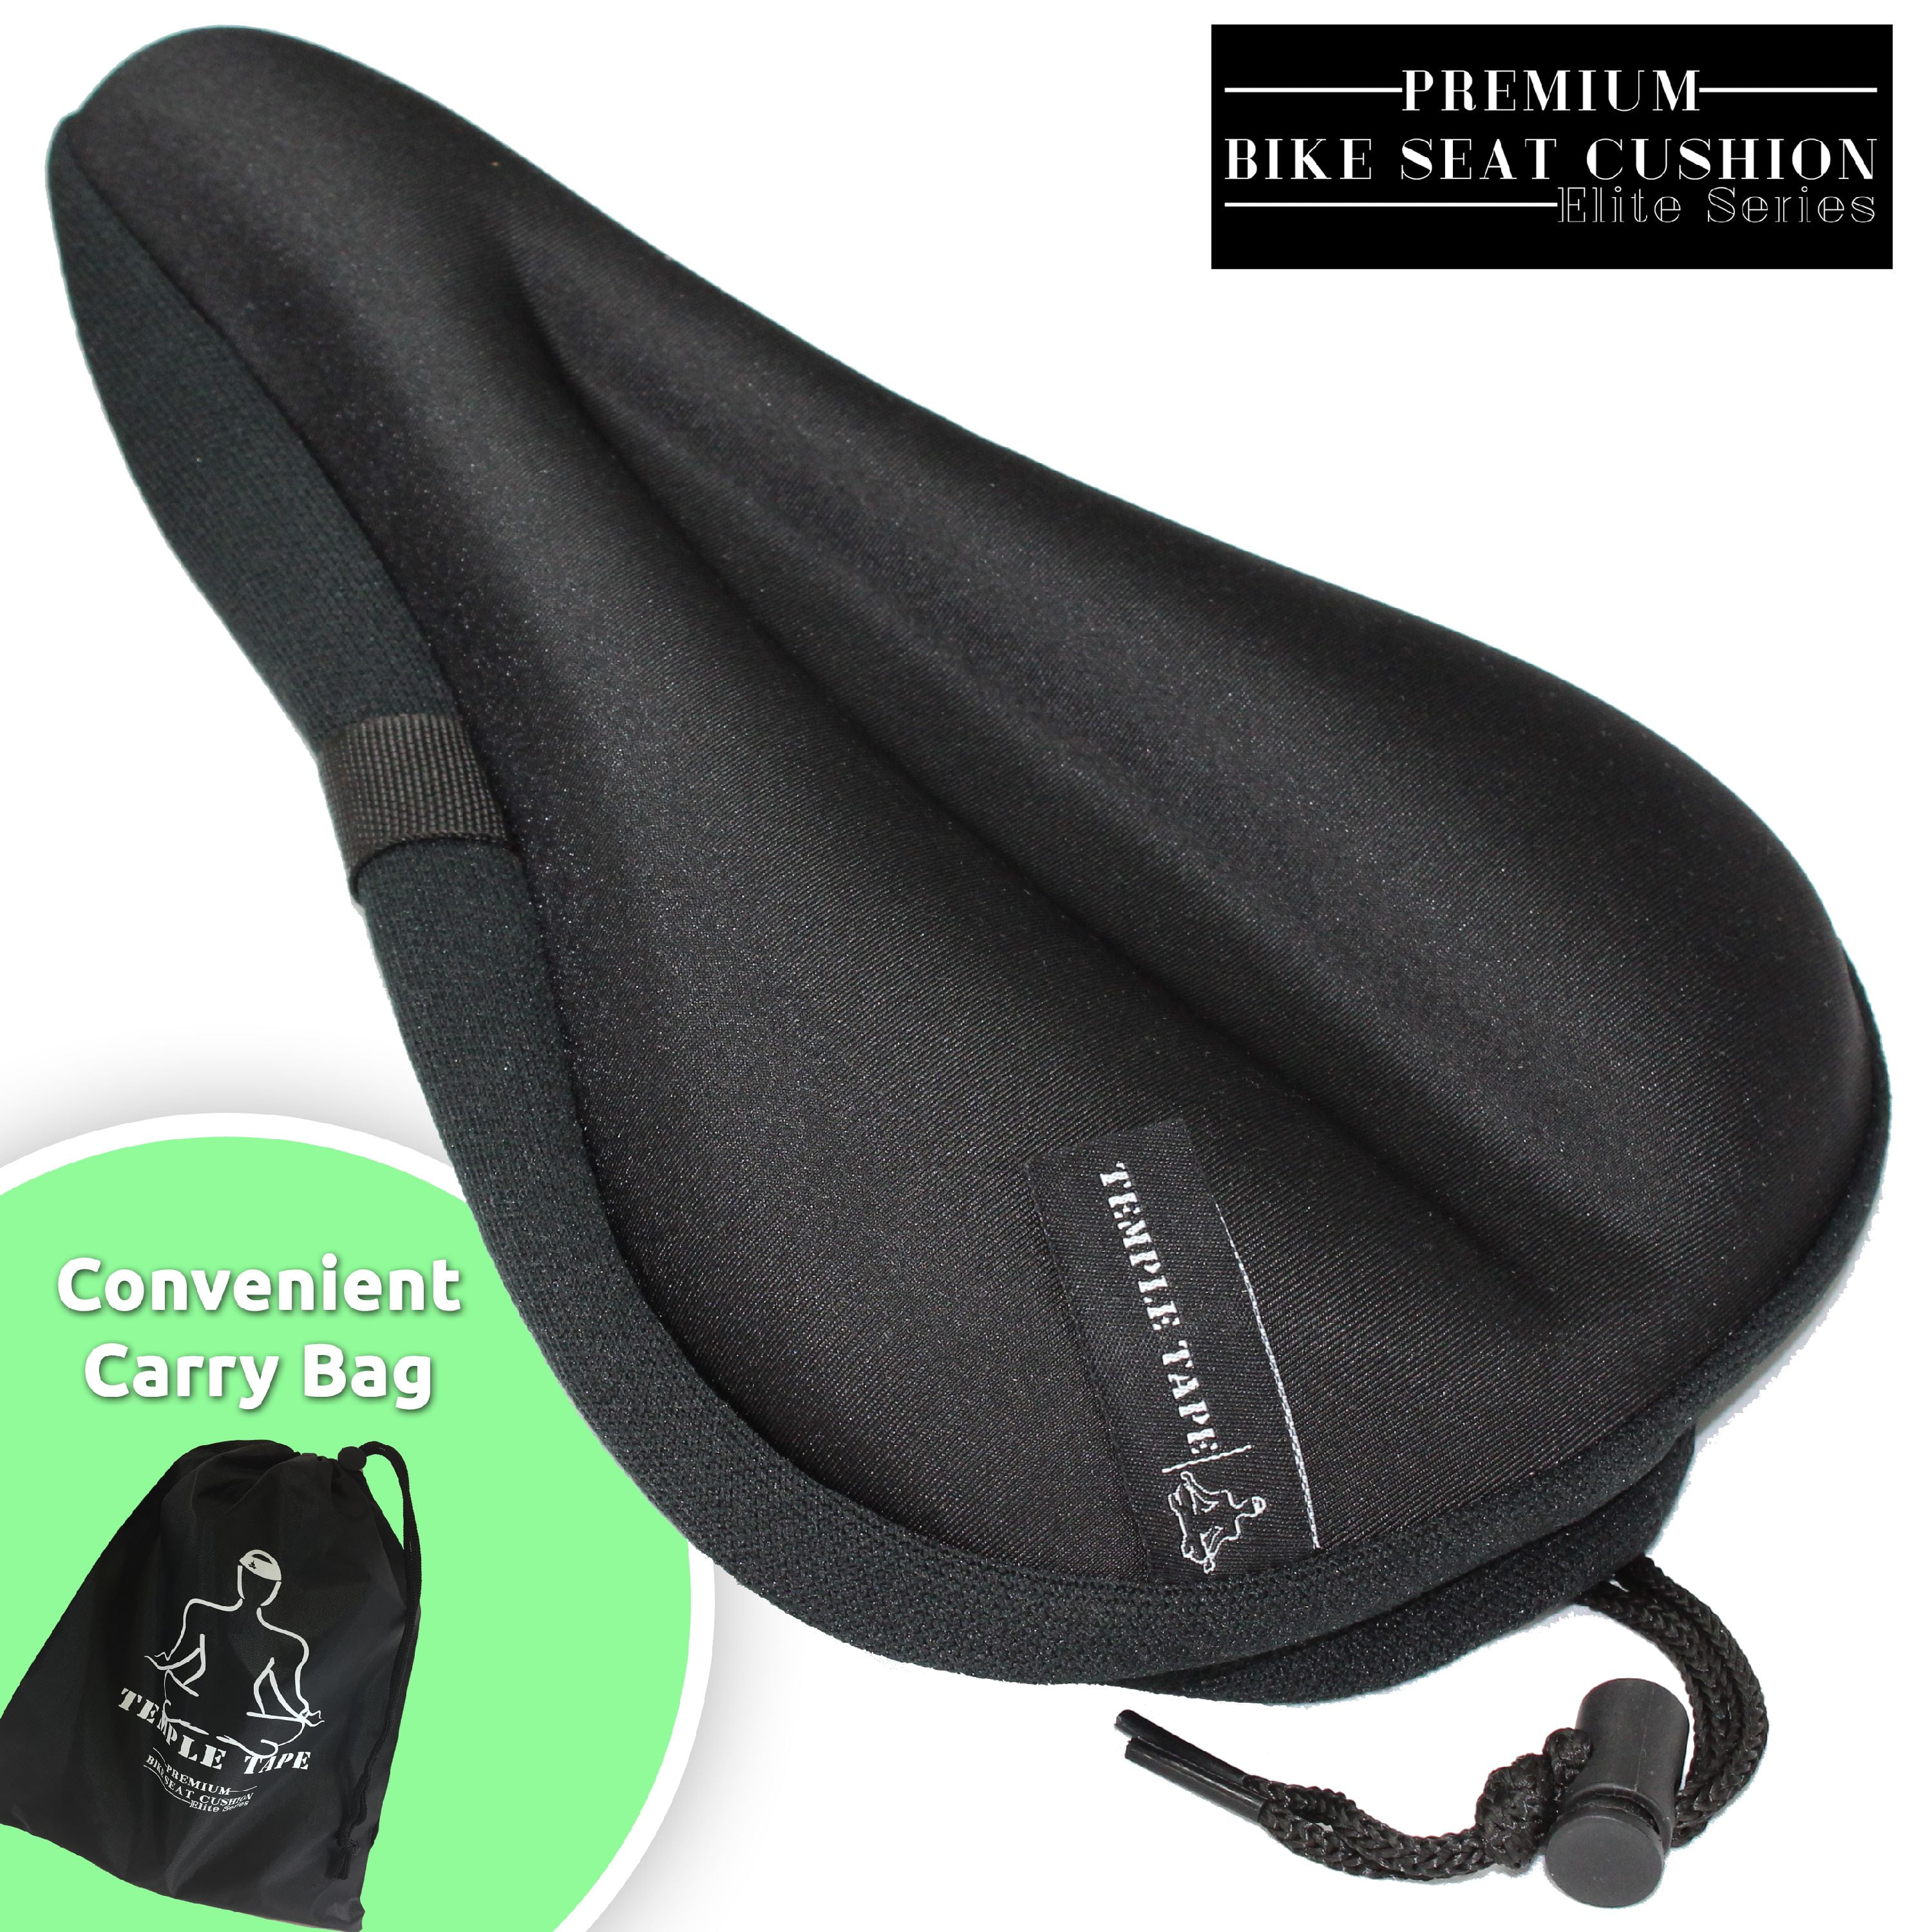 Large Exercise Bike Seat Cushion – 11 inches x 12 inches Soft Bike Gel Saddle  Cover - Bicycle Wide Gel Soft Pad - Most Comfortable XXL Bicycle Saddle for  Sale in Chino, CA - OfferUp